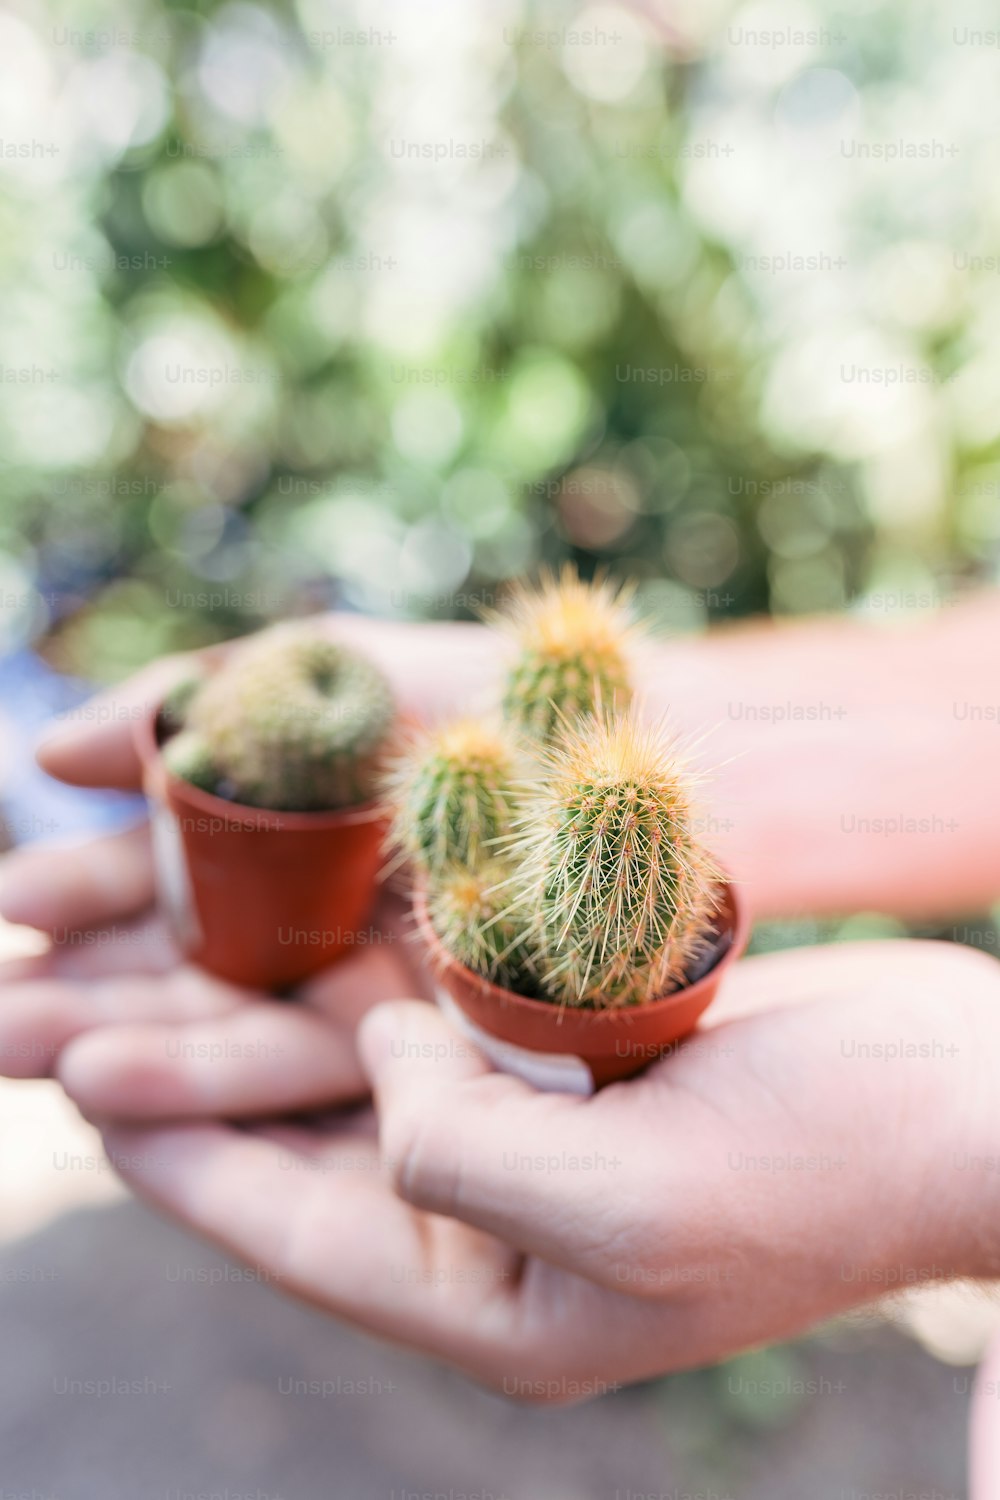 a person holding a small cactus in their hands